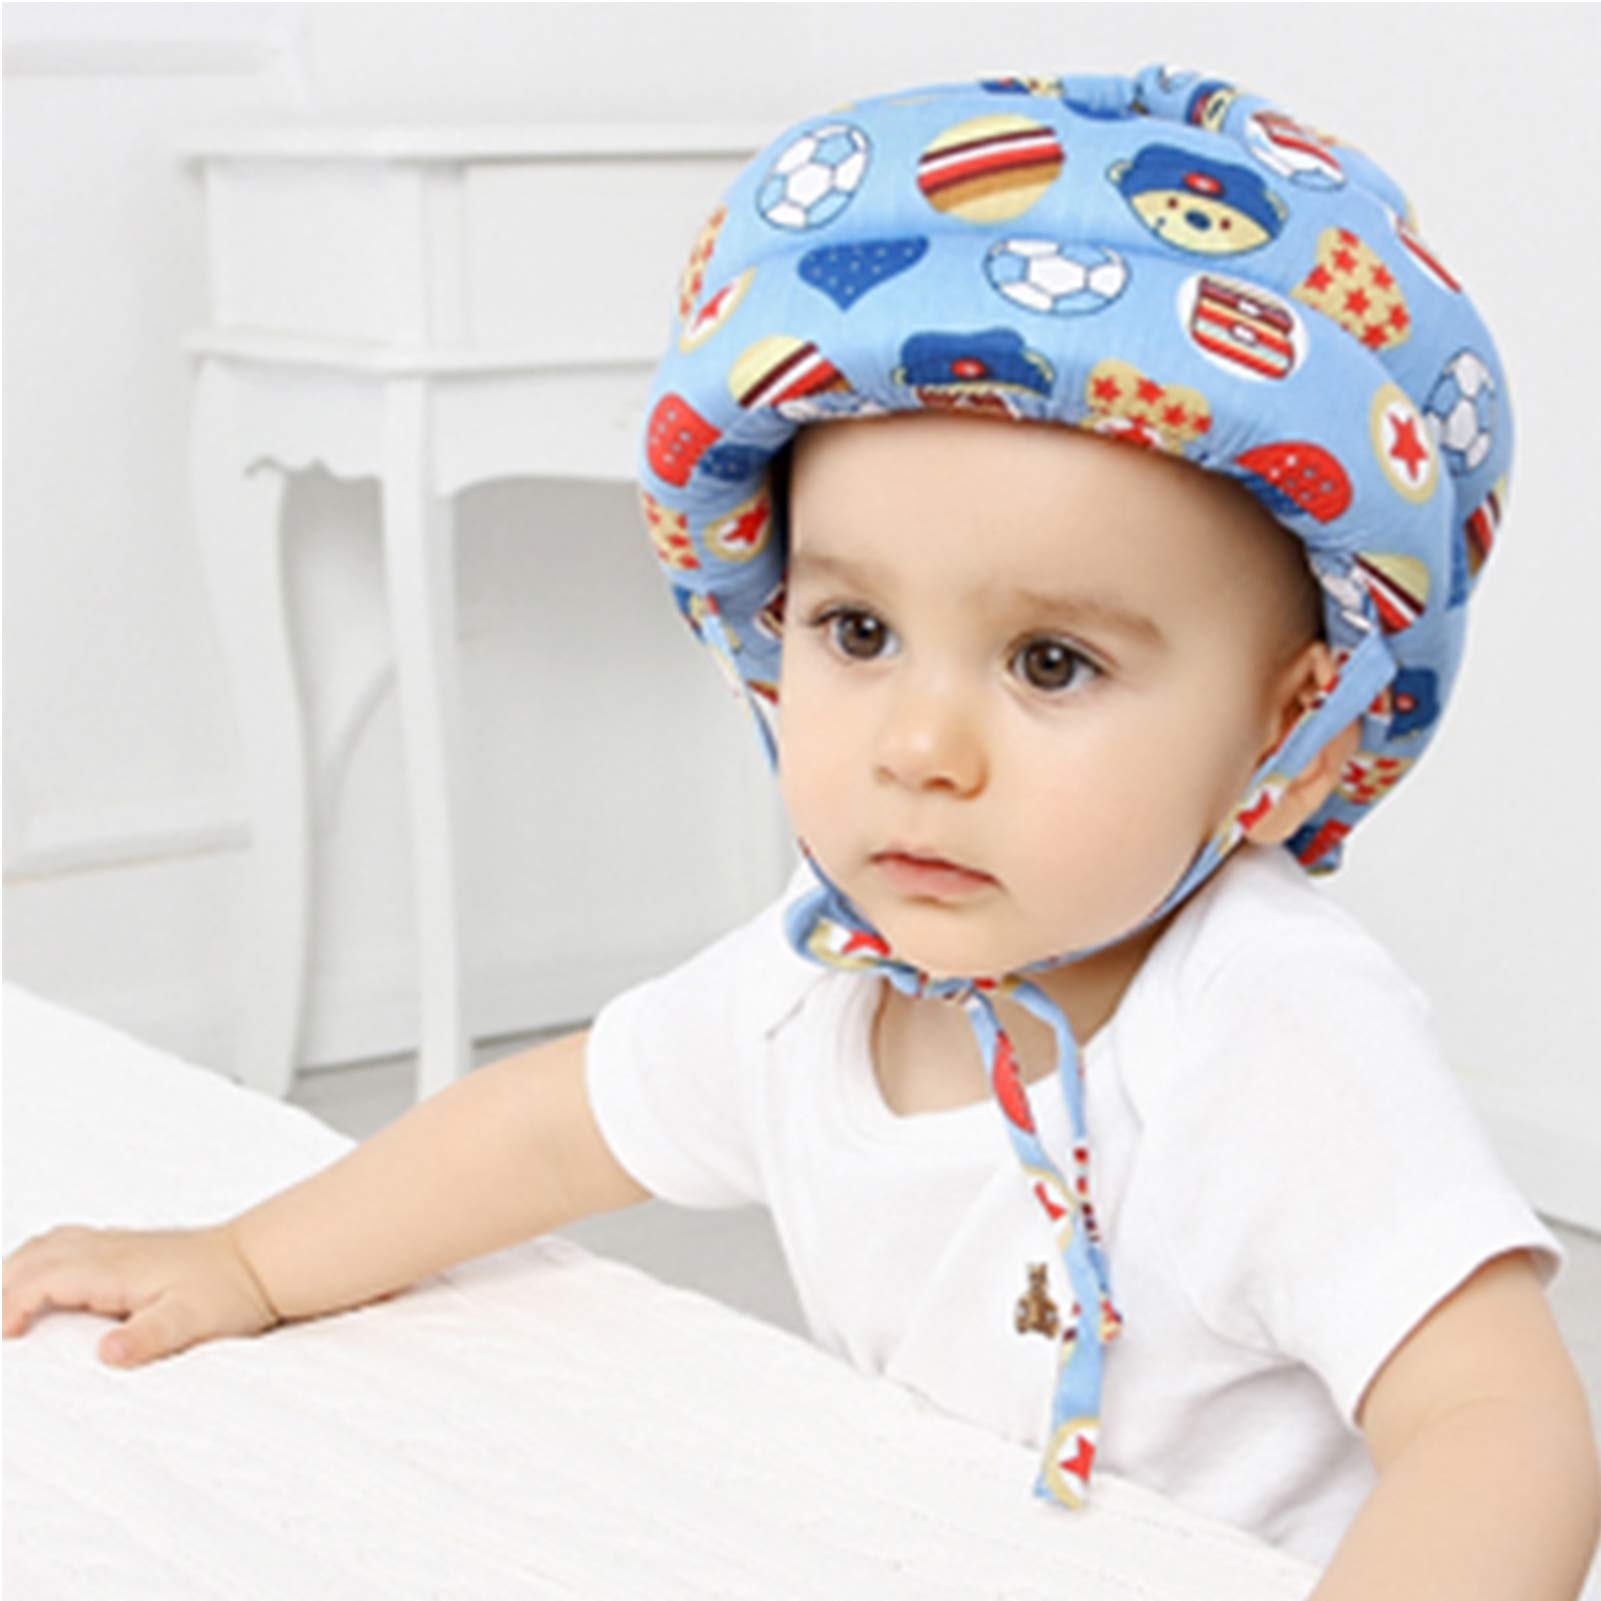 IULONEE Baby Infant Toddler Helmet No Bump Safety Head Cushion Bumper Bonnet Adjustable Protective Cap Child Safety Headguard Hat for Running Walking Crawling Safety Helmet for Kid (Blue Ball)